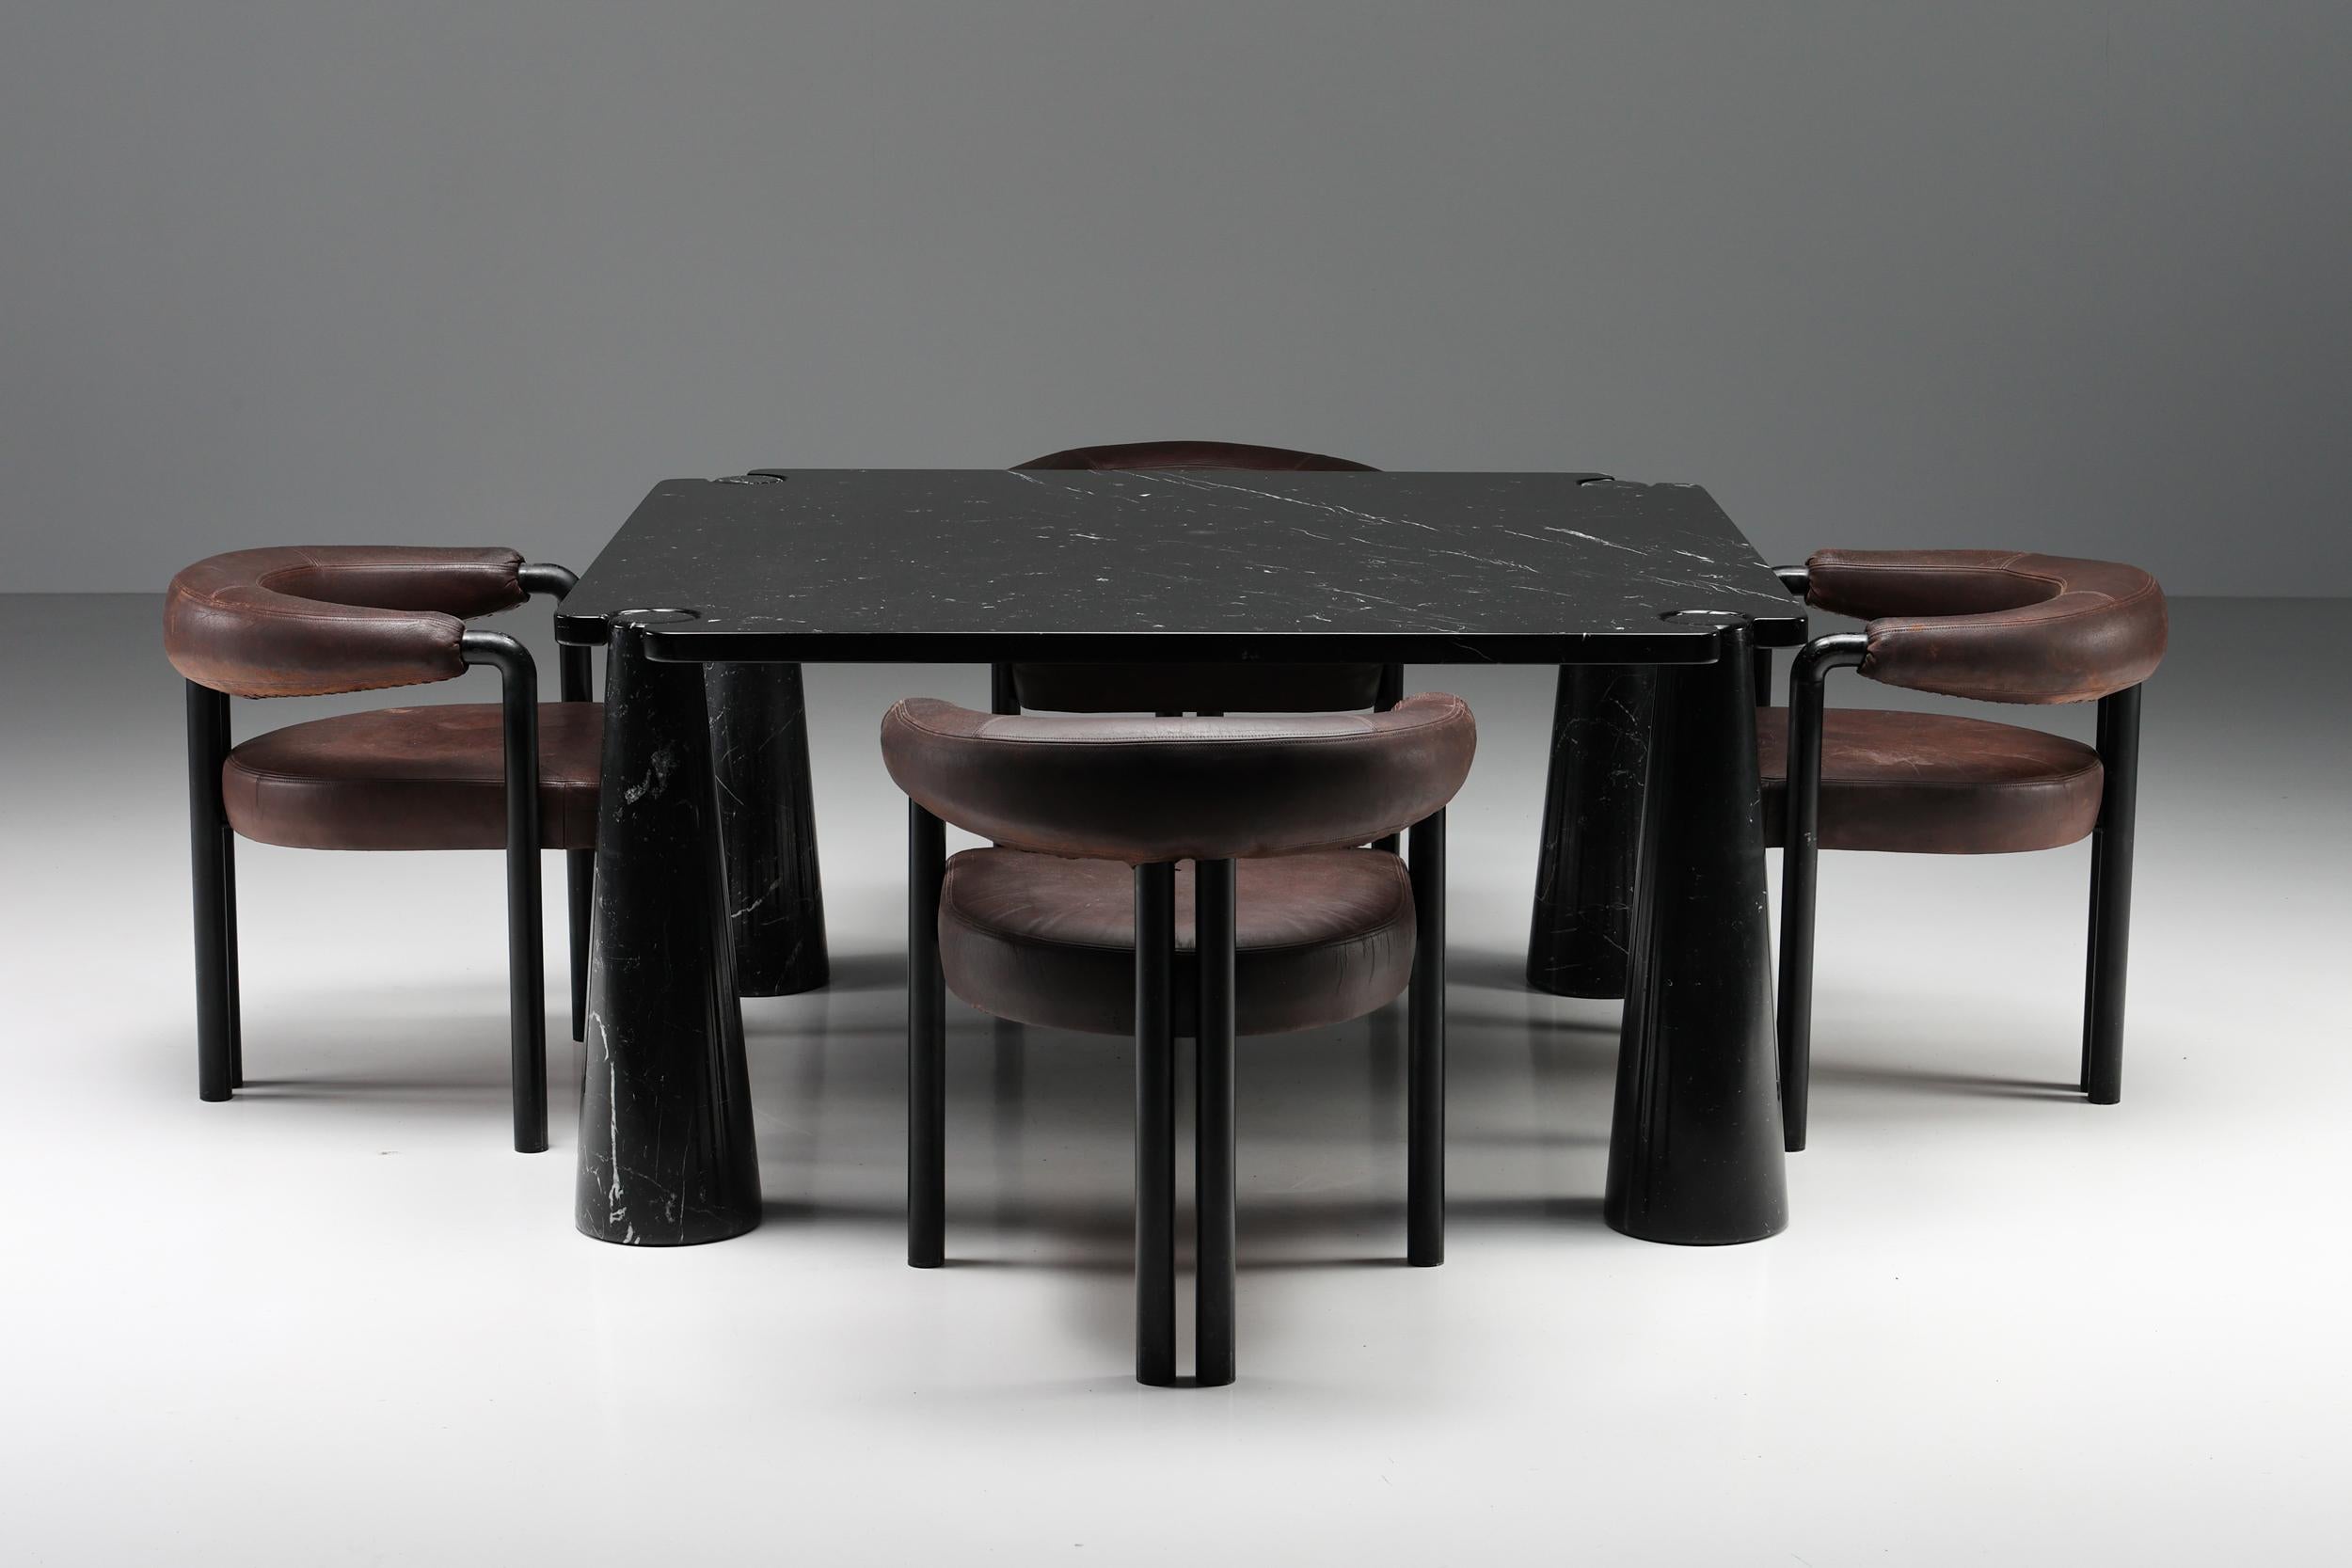 20th Century Mangiarotti 'Eros' Square Marble Dining Table, Italy, Post-Modern, 1970's For Sale